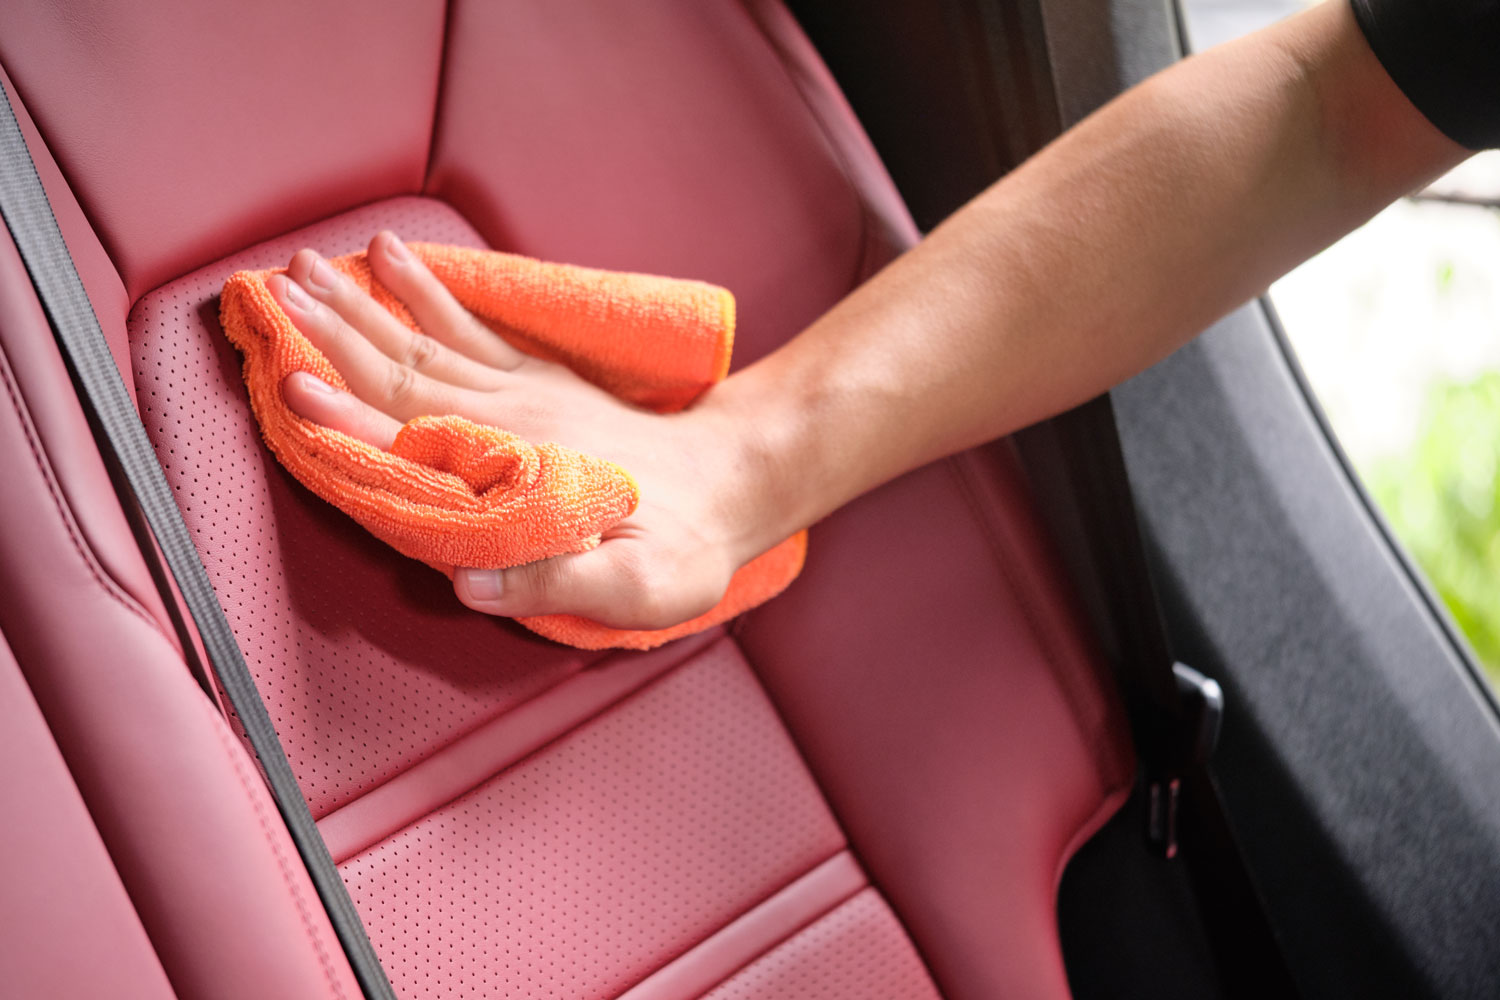 How To Clean And Condition Leather Car Interior